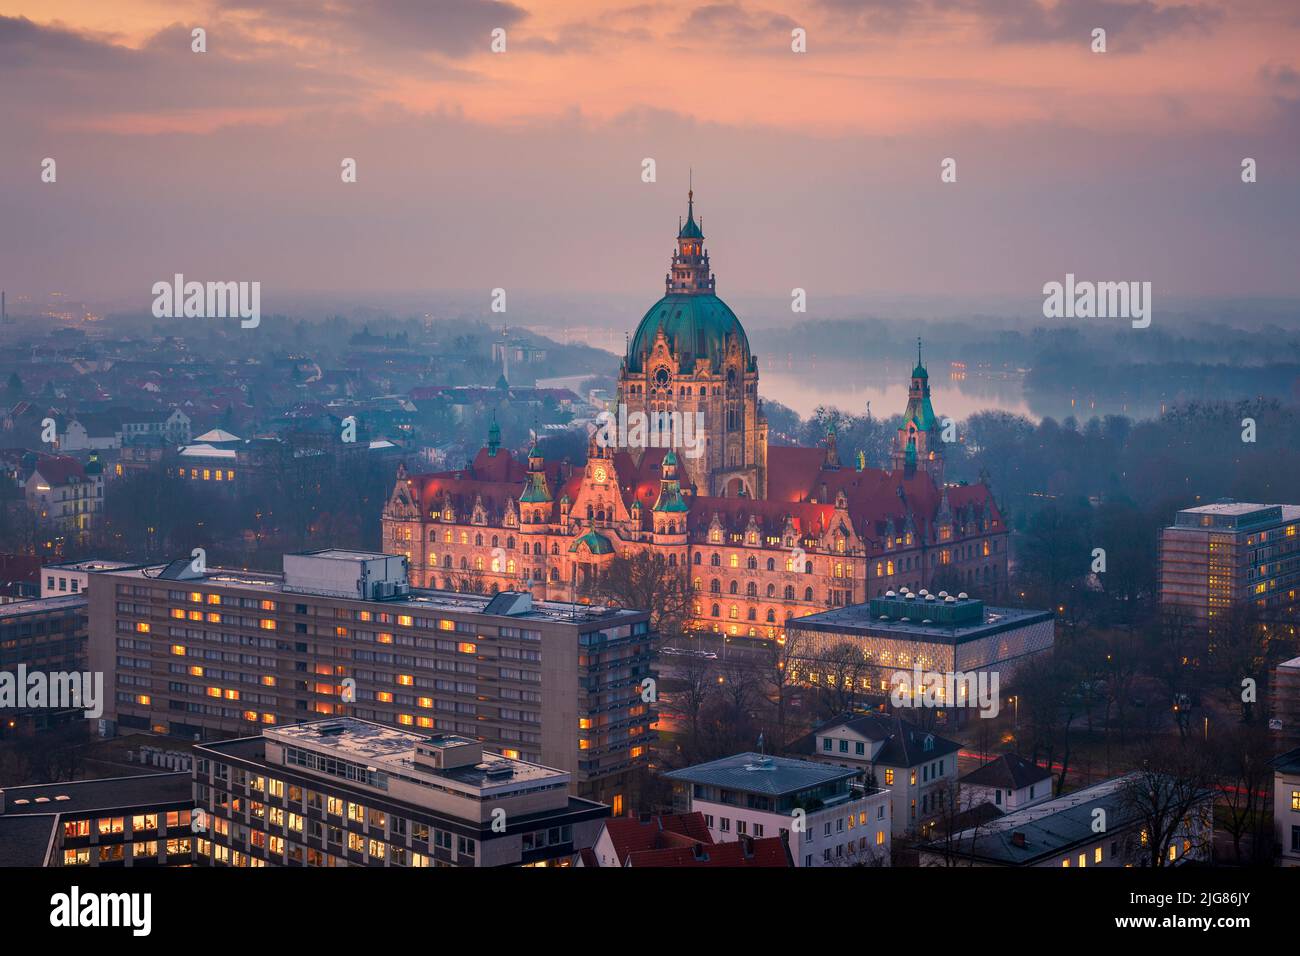 Aerial view of the City Hall of Hannover, Germany Stock Photo